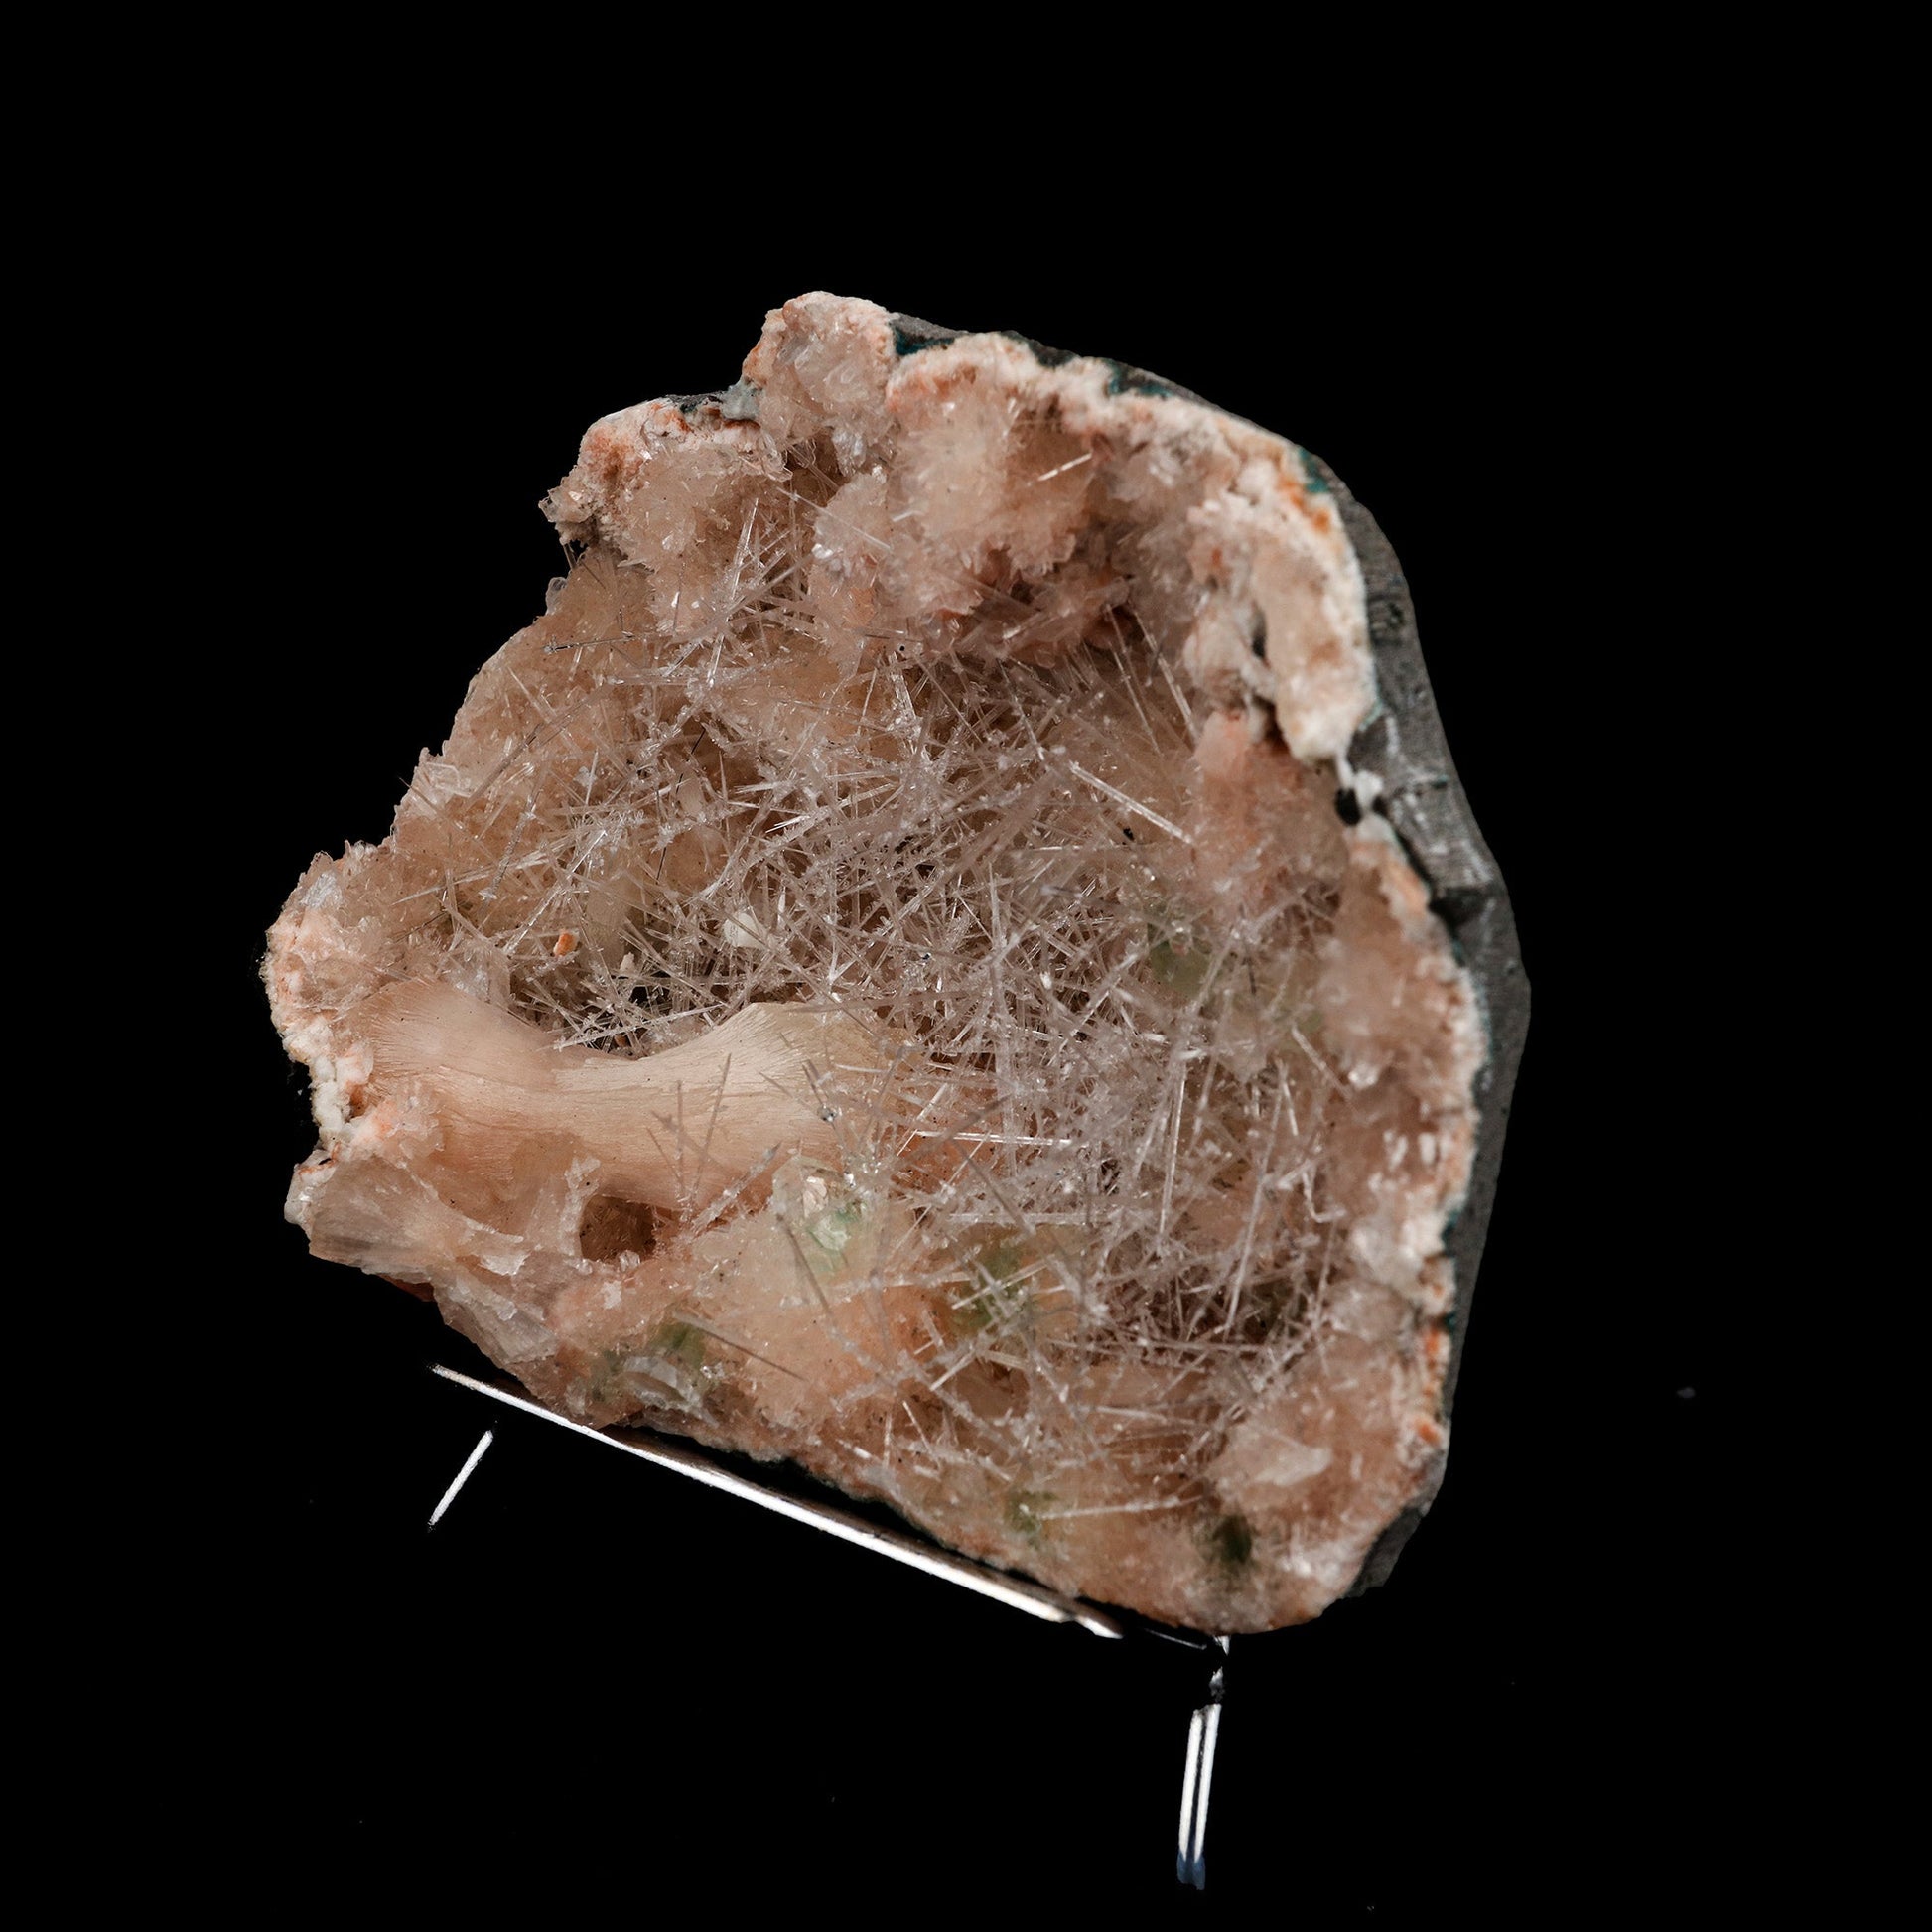 Scolecite Mesh Formation On Stilbite, Heulandite Natural Mineral Speci…  https://www.superbminerals.us/products/scolecite-mesh-formation-on-stilbite-heulandite-natural-mineral-specimen-b-5258  Features: Scholecite crystals are interspersed throughout a very large Geode which is lined with beige Heulandite crystals. The sprays of Scolecite crystals are glossy, colourless, highly translucent, acicular (needle-like) in shape. 